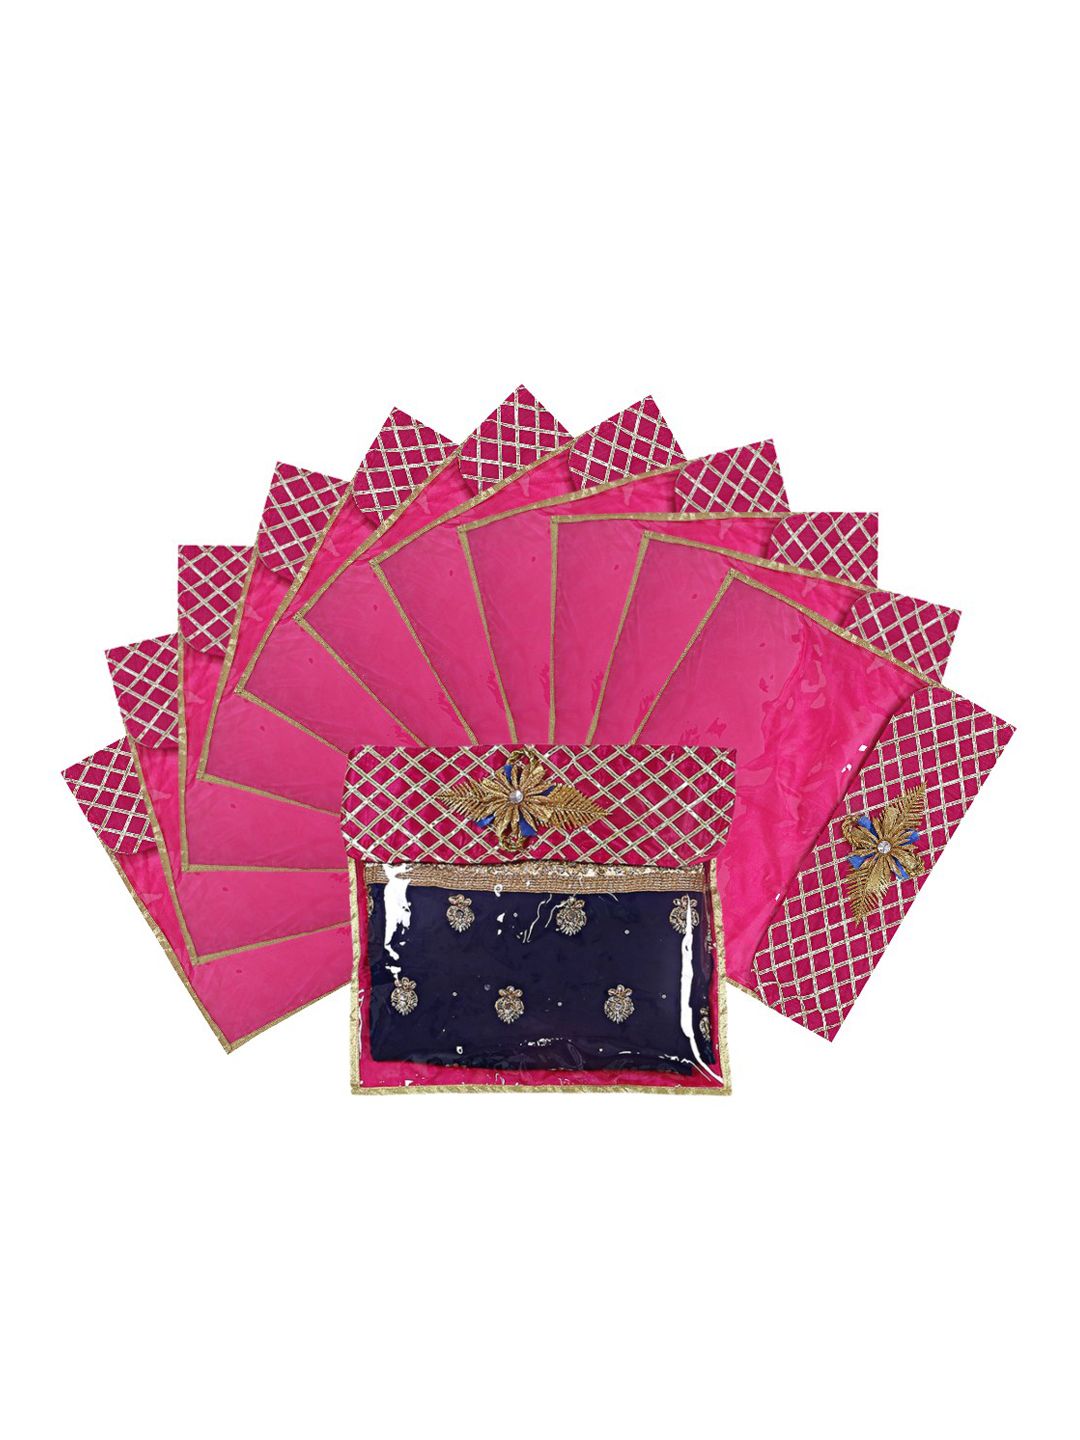 Kuber Industries Set Of 12 Pink & Gold-Coloured Embellished Saree Organizers Price in India